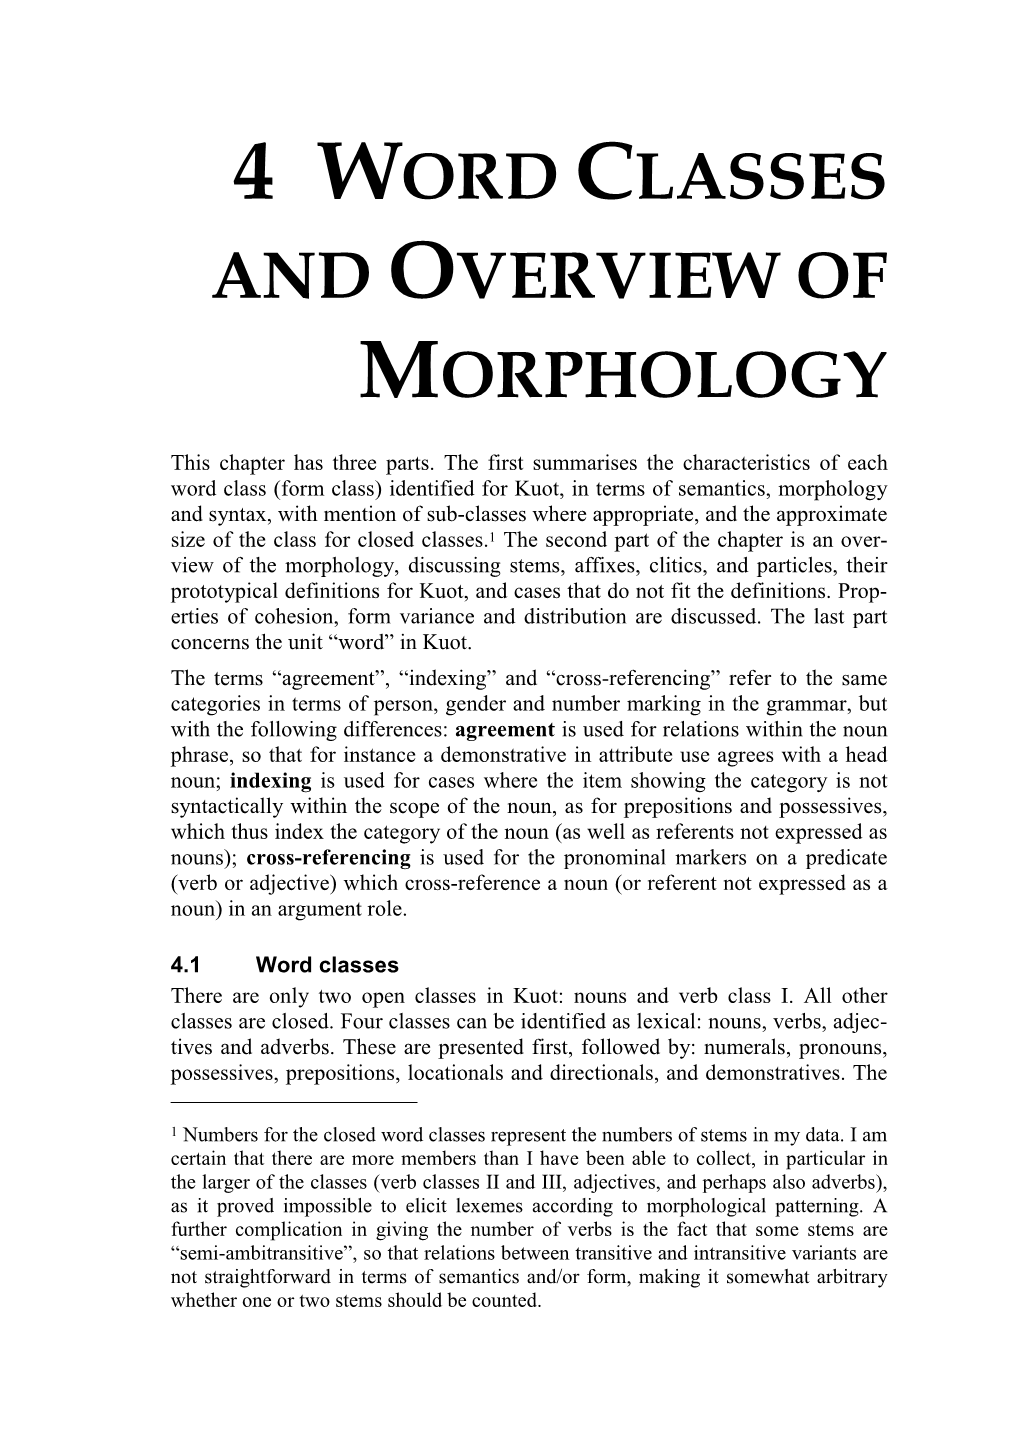 4 Word Classes and Overview of Morphology